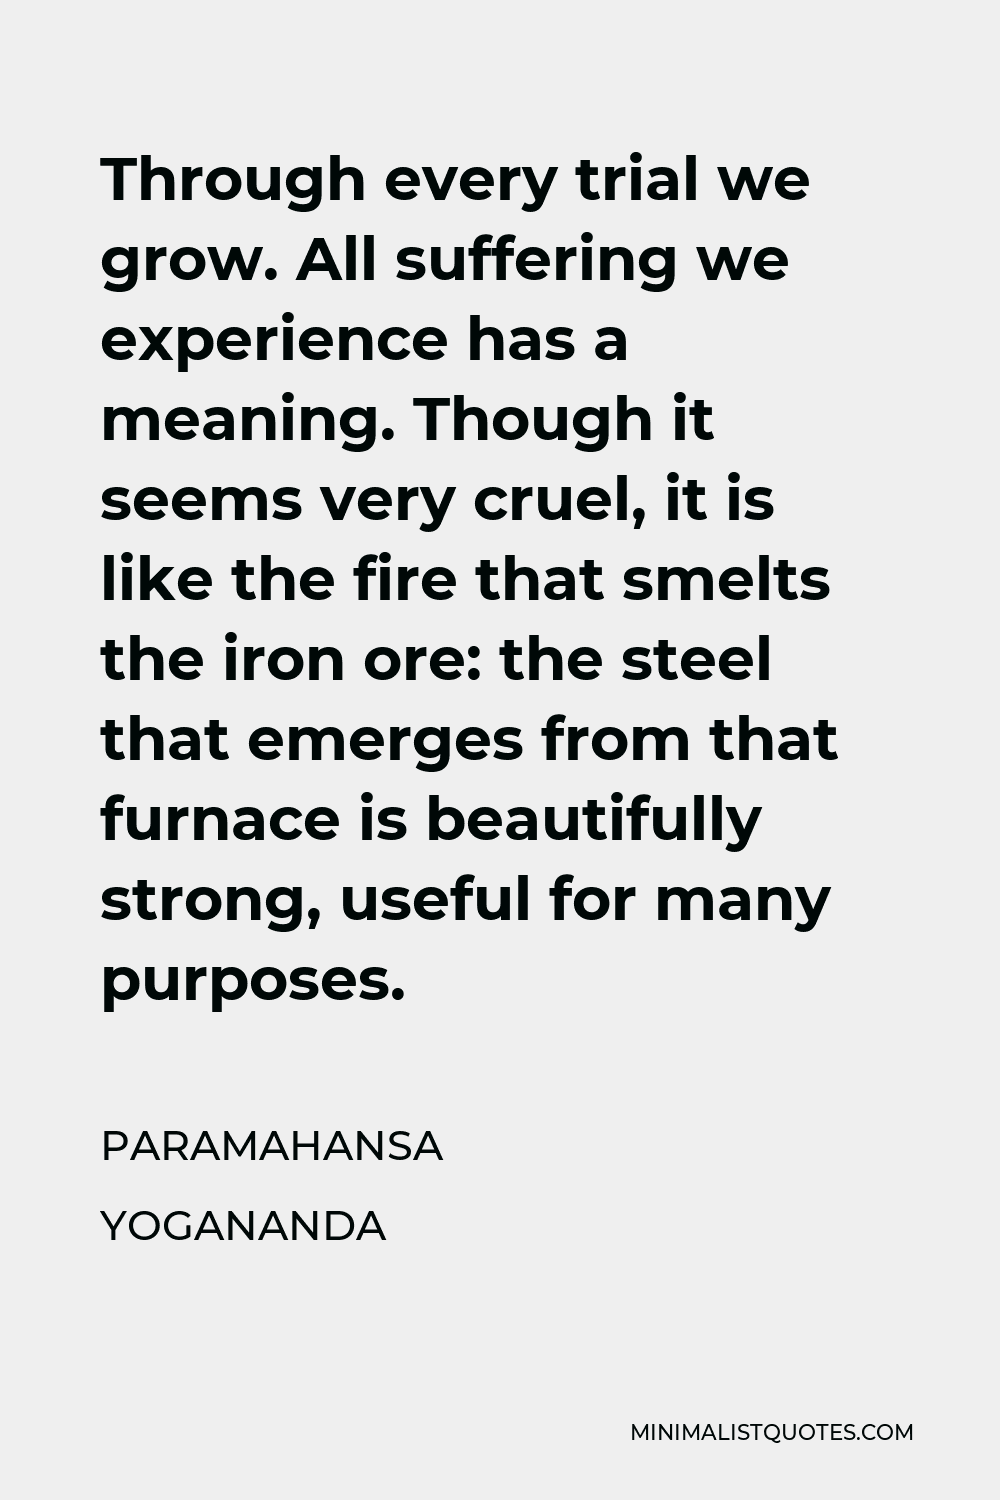 Paramahansa Yogananda Quote - Through every trial we grow. All suffering we experience has a meaning. Though it seems very cruel, it is like the fire that smelts the iron ore: the steel that emerges from that furnace is beautifully strong, useful for many purposes.